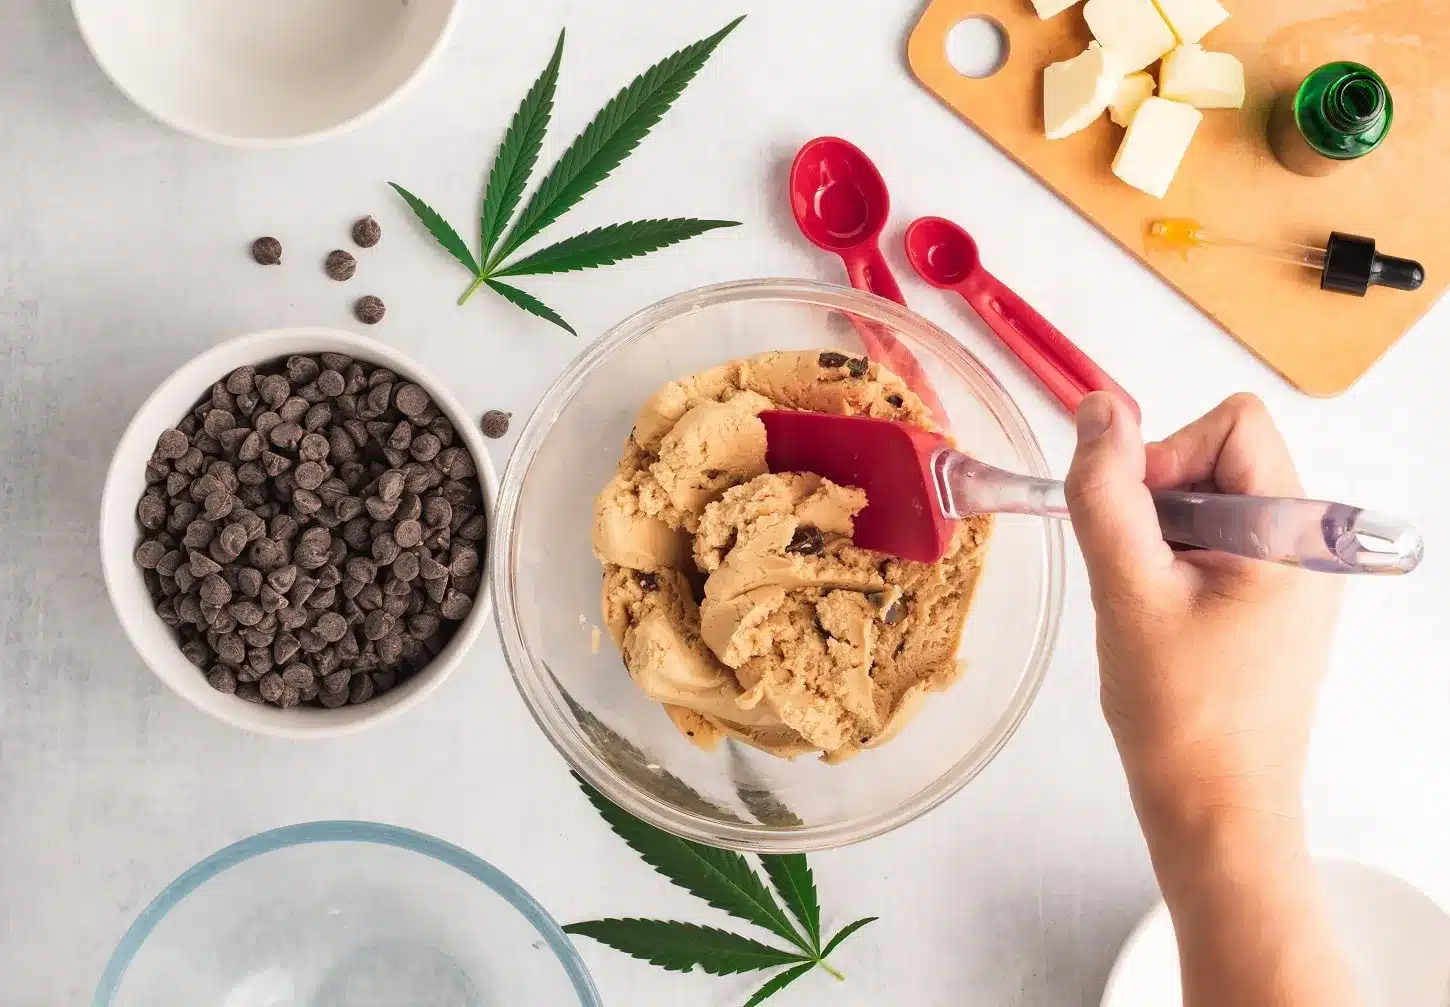 Cooking with Cannabis: Tips for Infusing Your Favorite Foods 